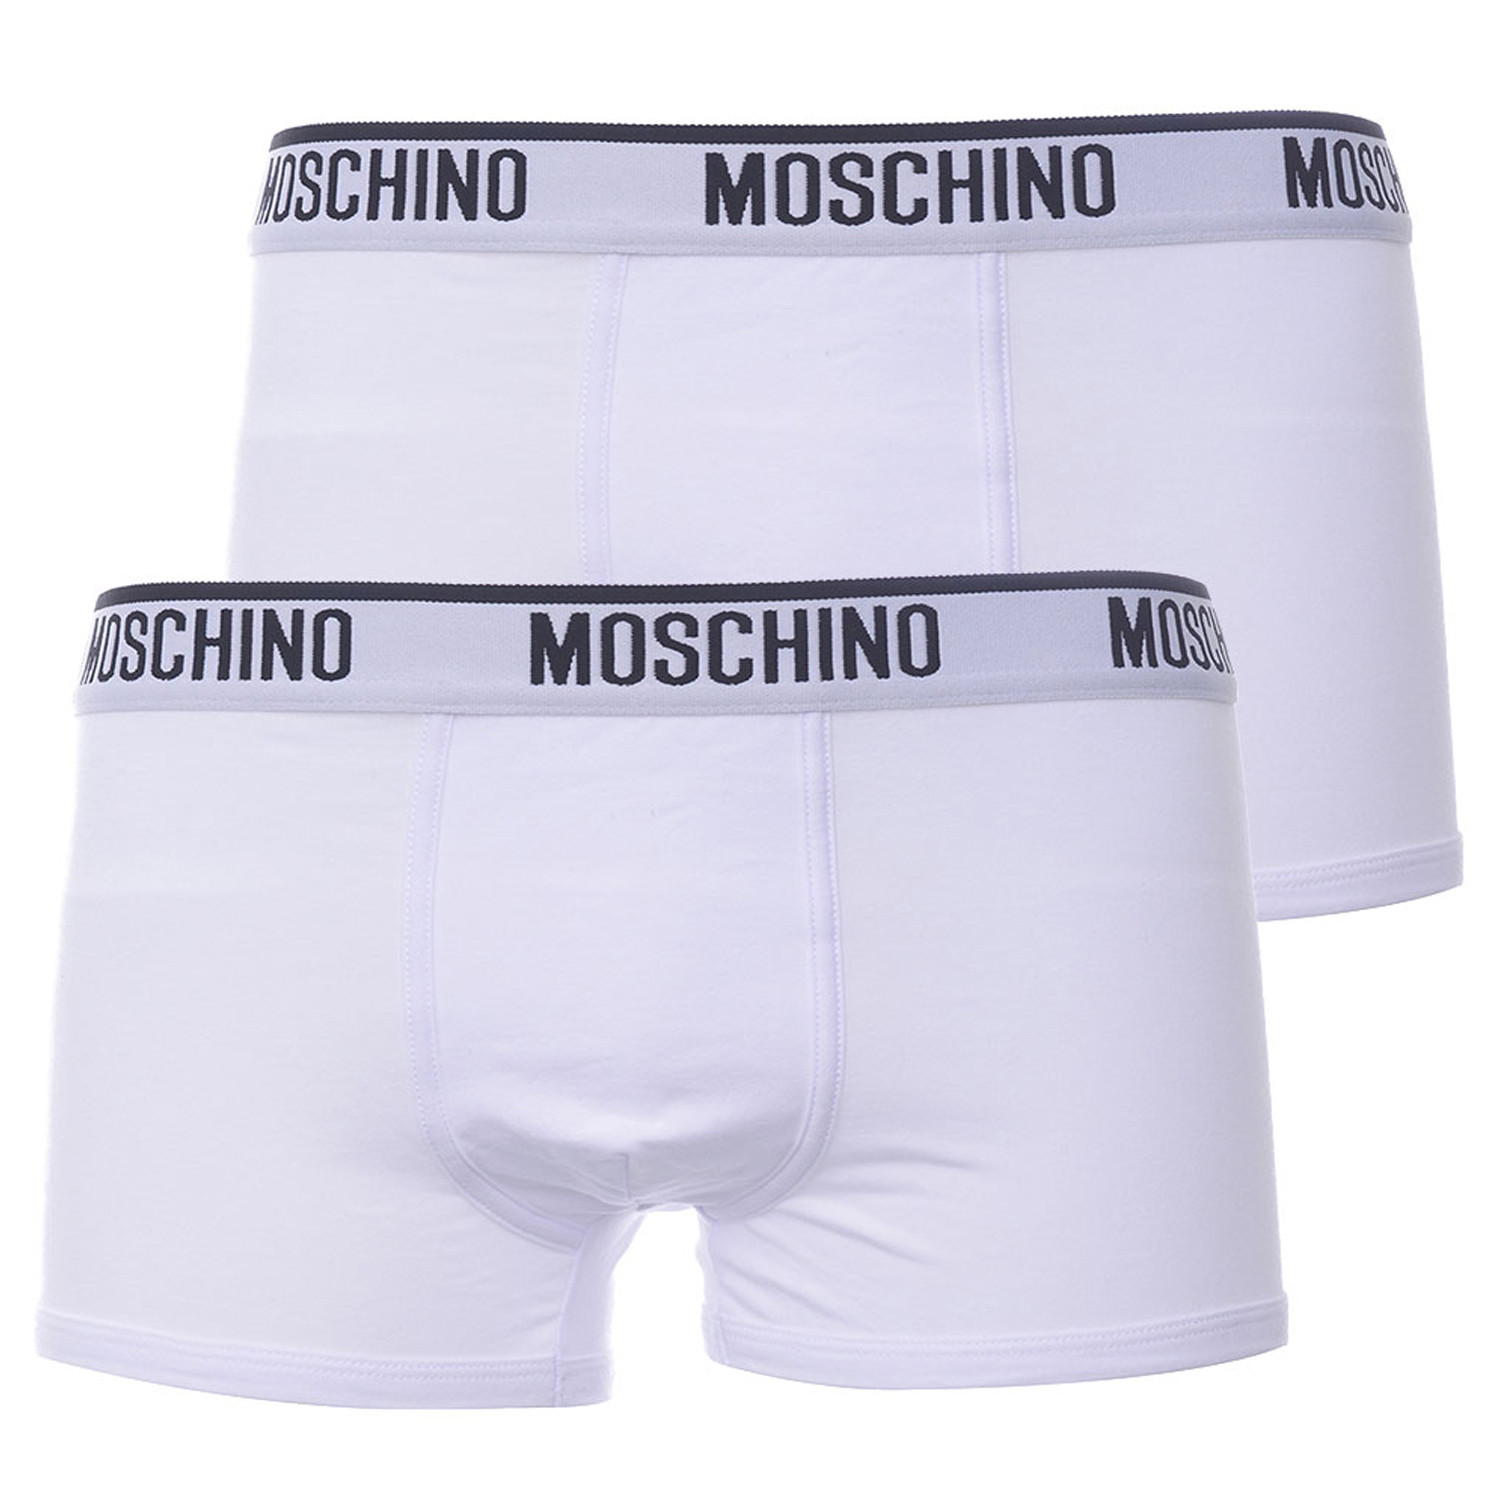 Moschino // Boxers // Pack of 2 // White + White (S) - Upscale ...